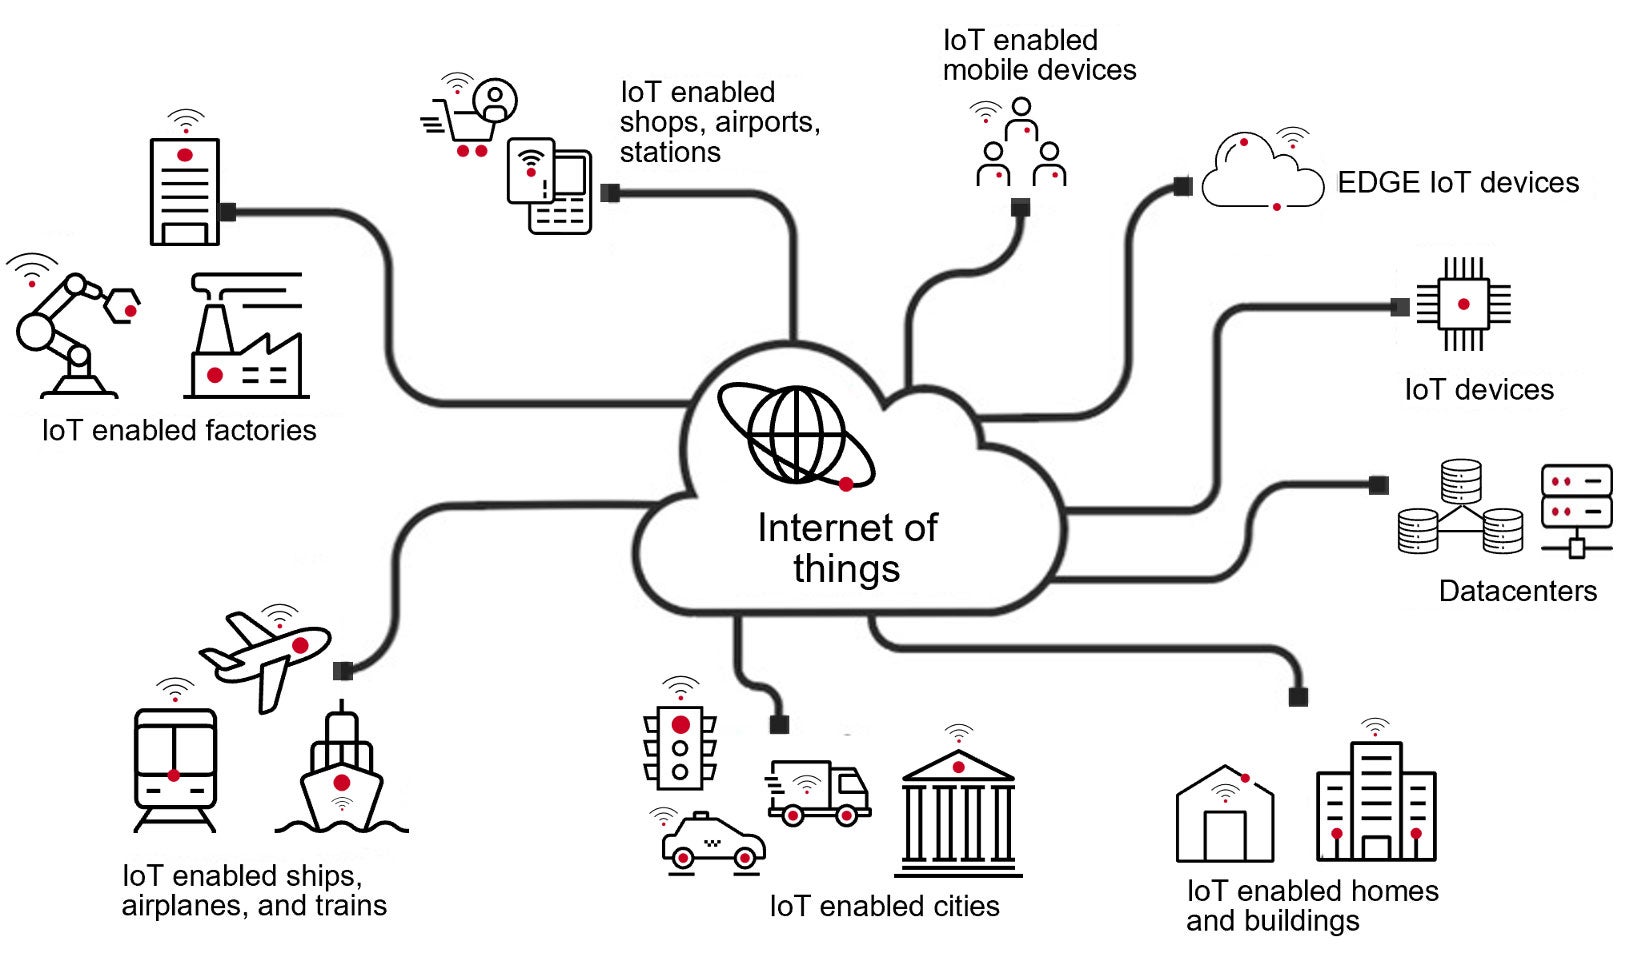 Ubiquity of the IoT image showing various paths